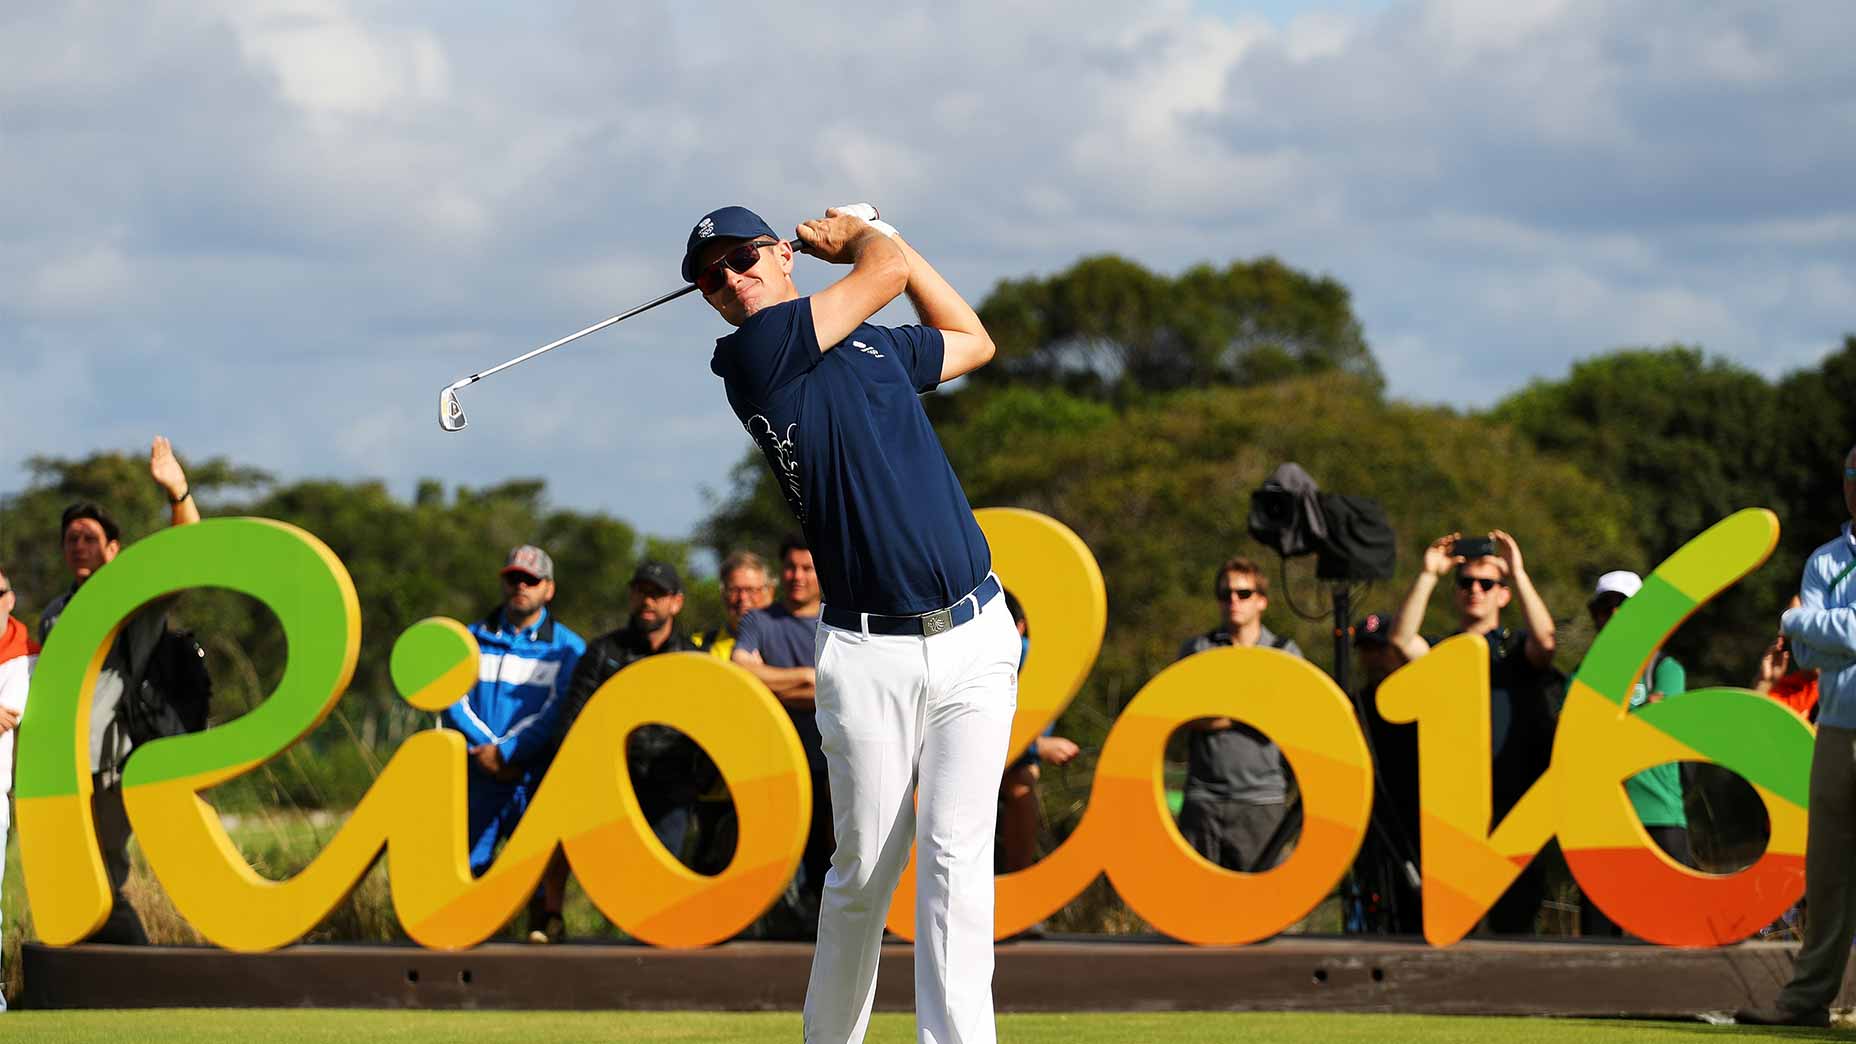 Is Golf In The Olympics 